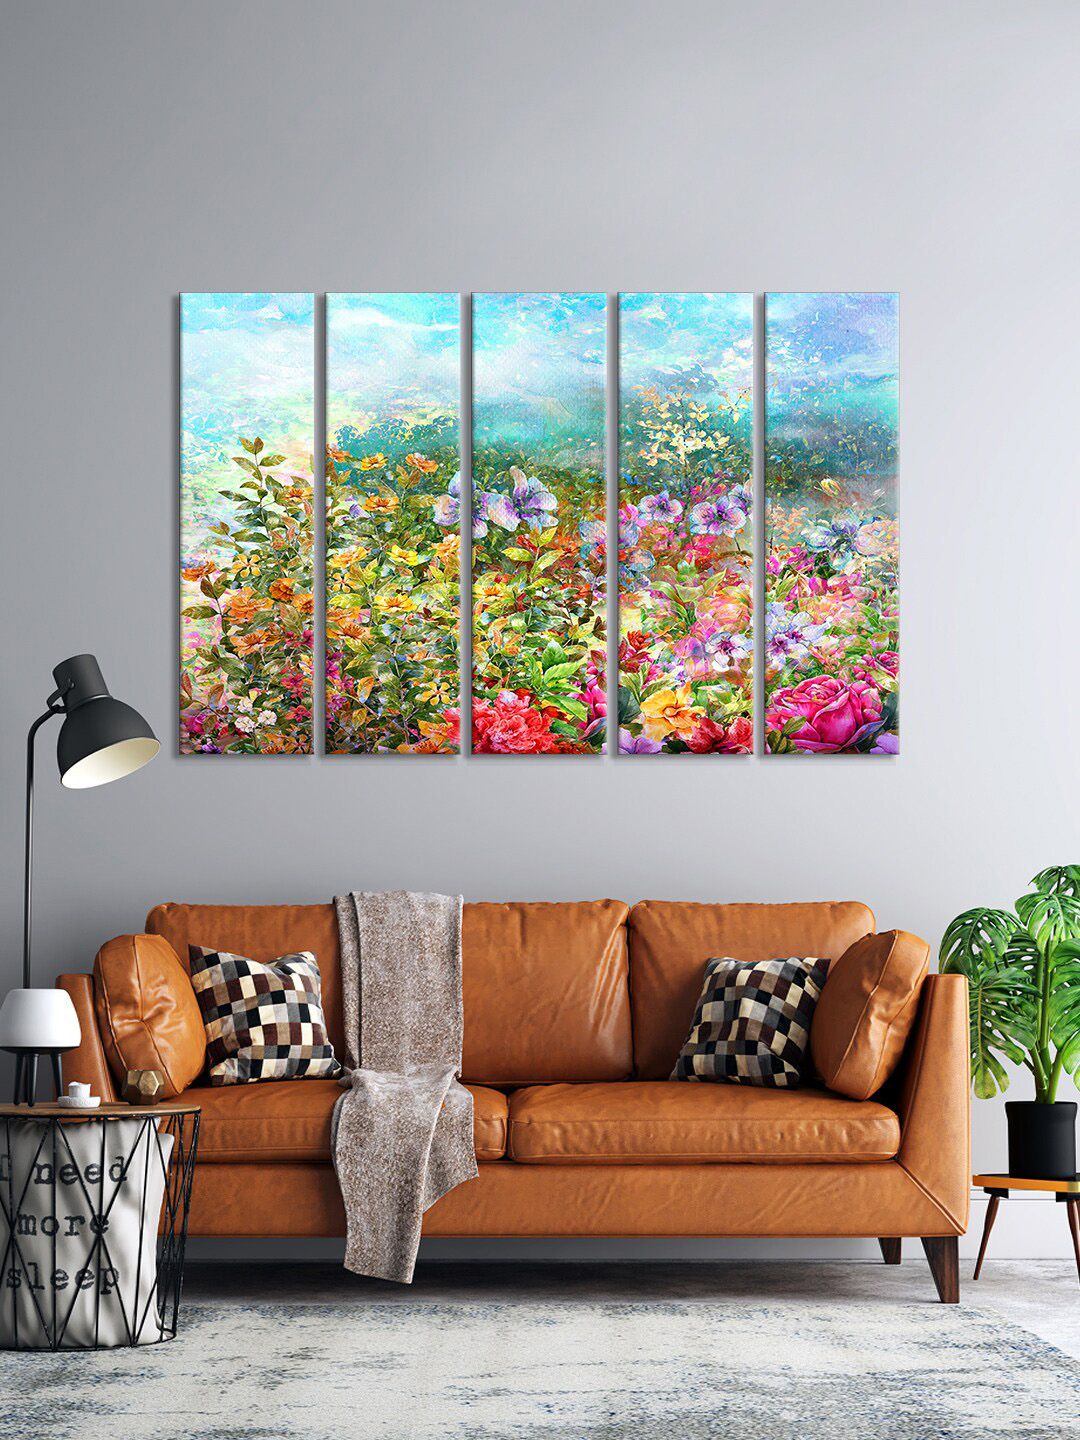 999Store Set of 5 Blue & Green Preiwinkle Plumeria Flowers Nature View Wall Painting Wall Hanging Price in India